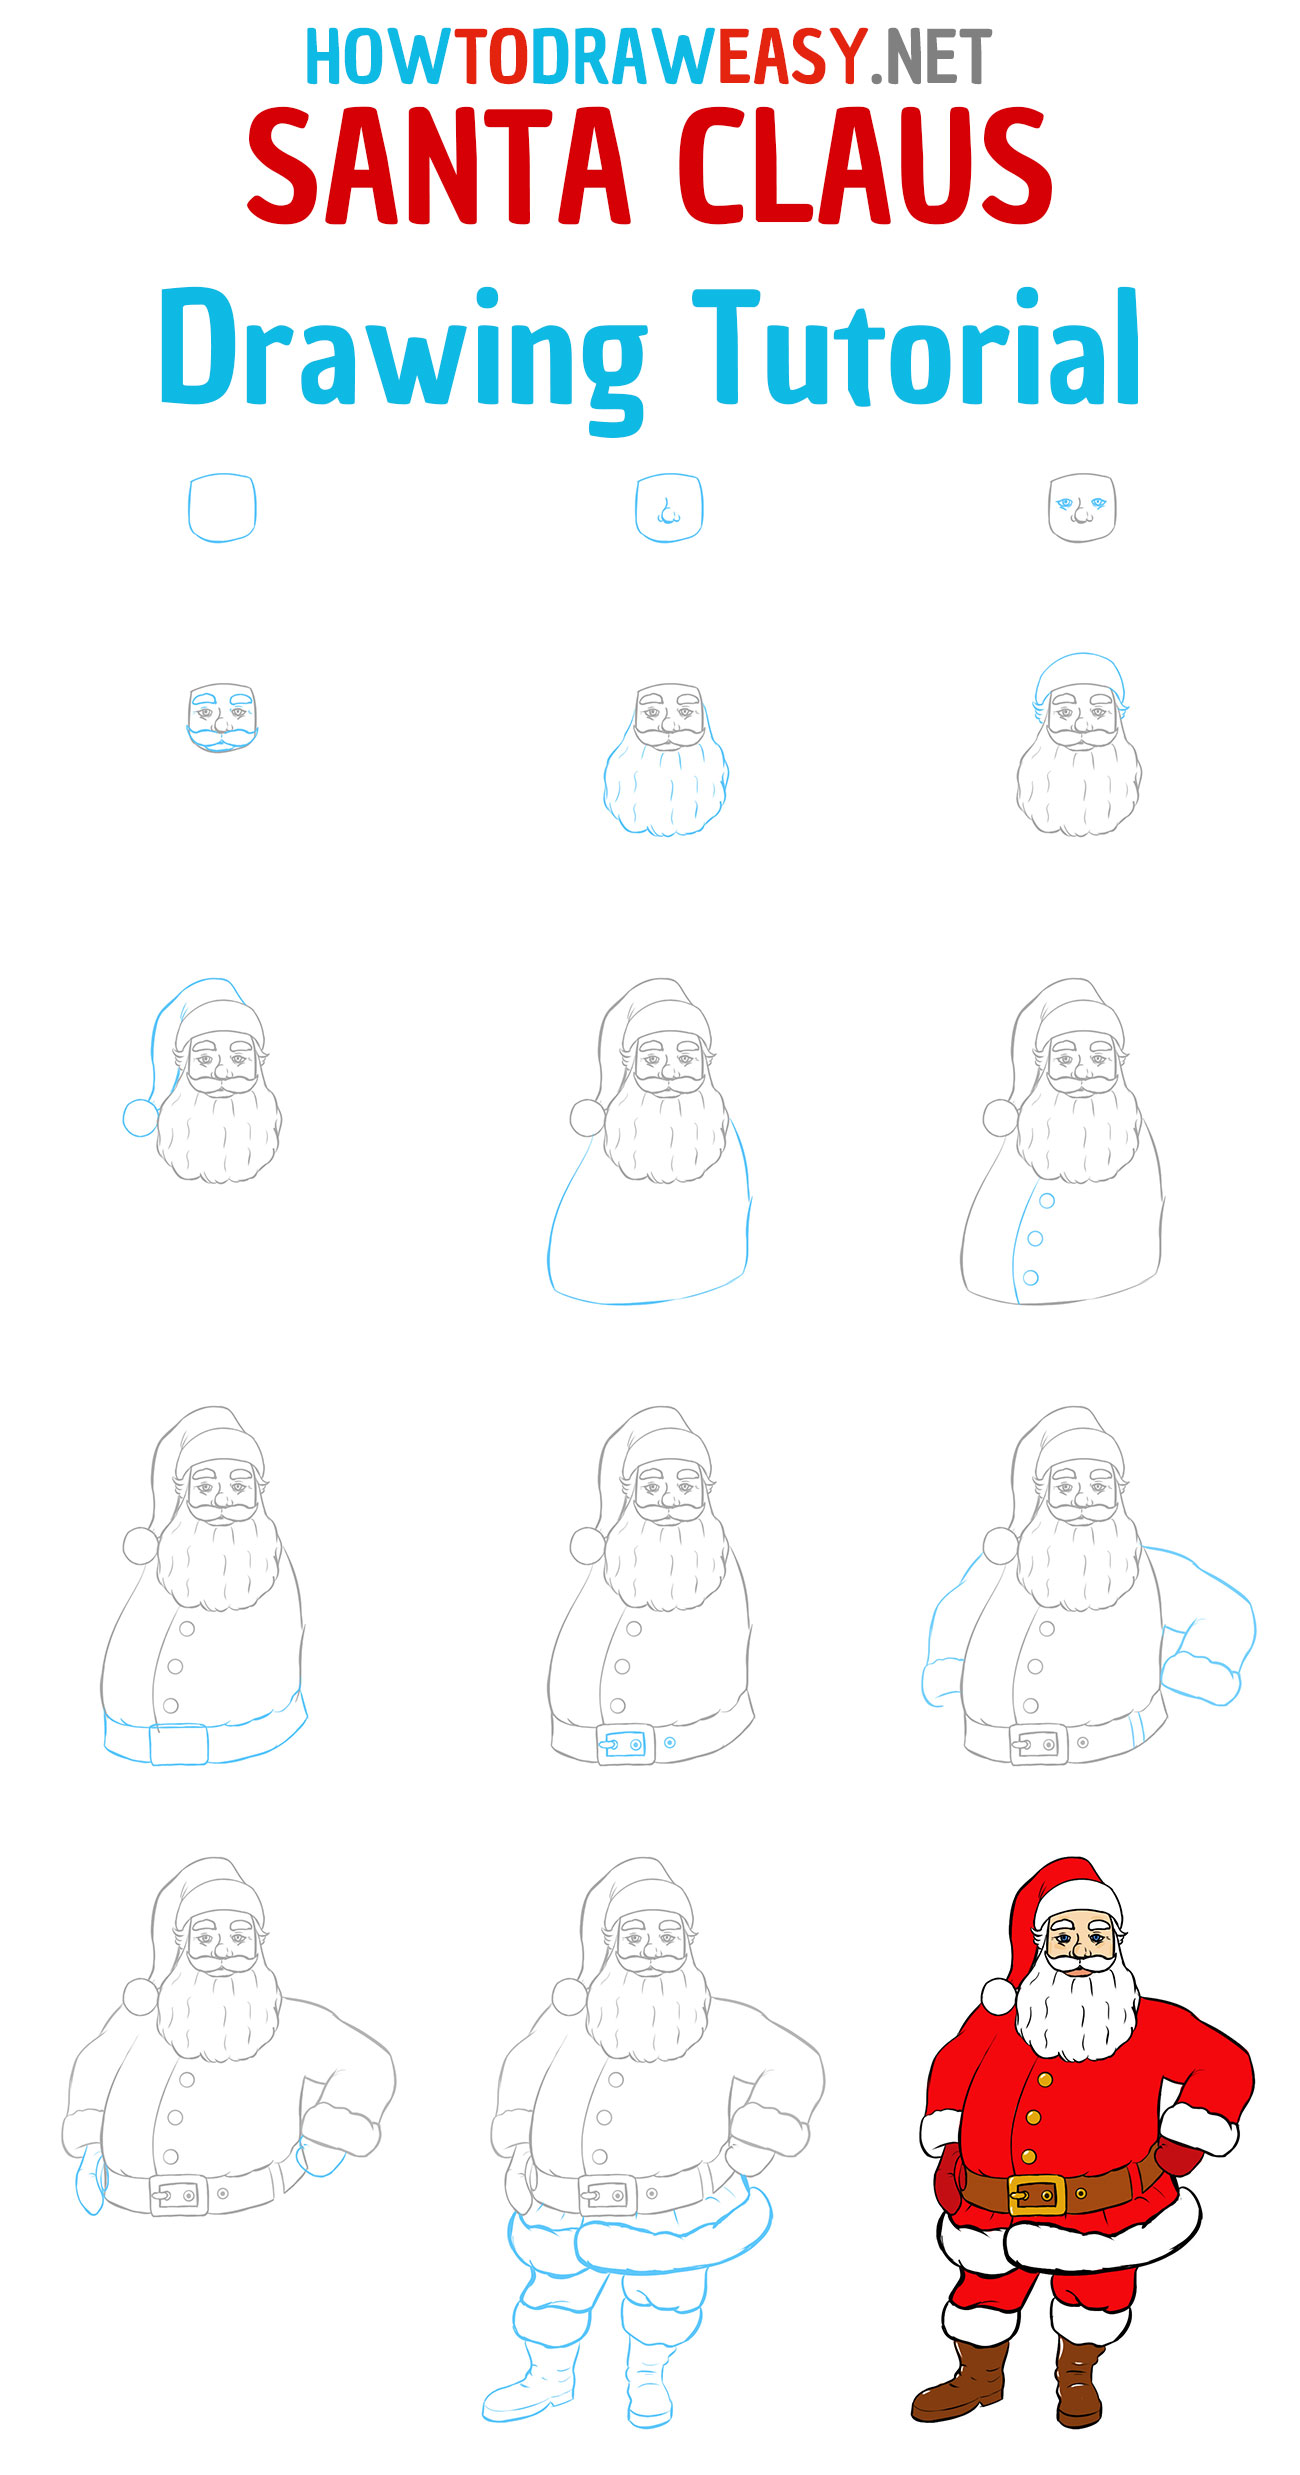 How to Draw Santa Claus Step by Step